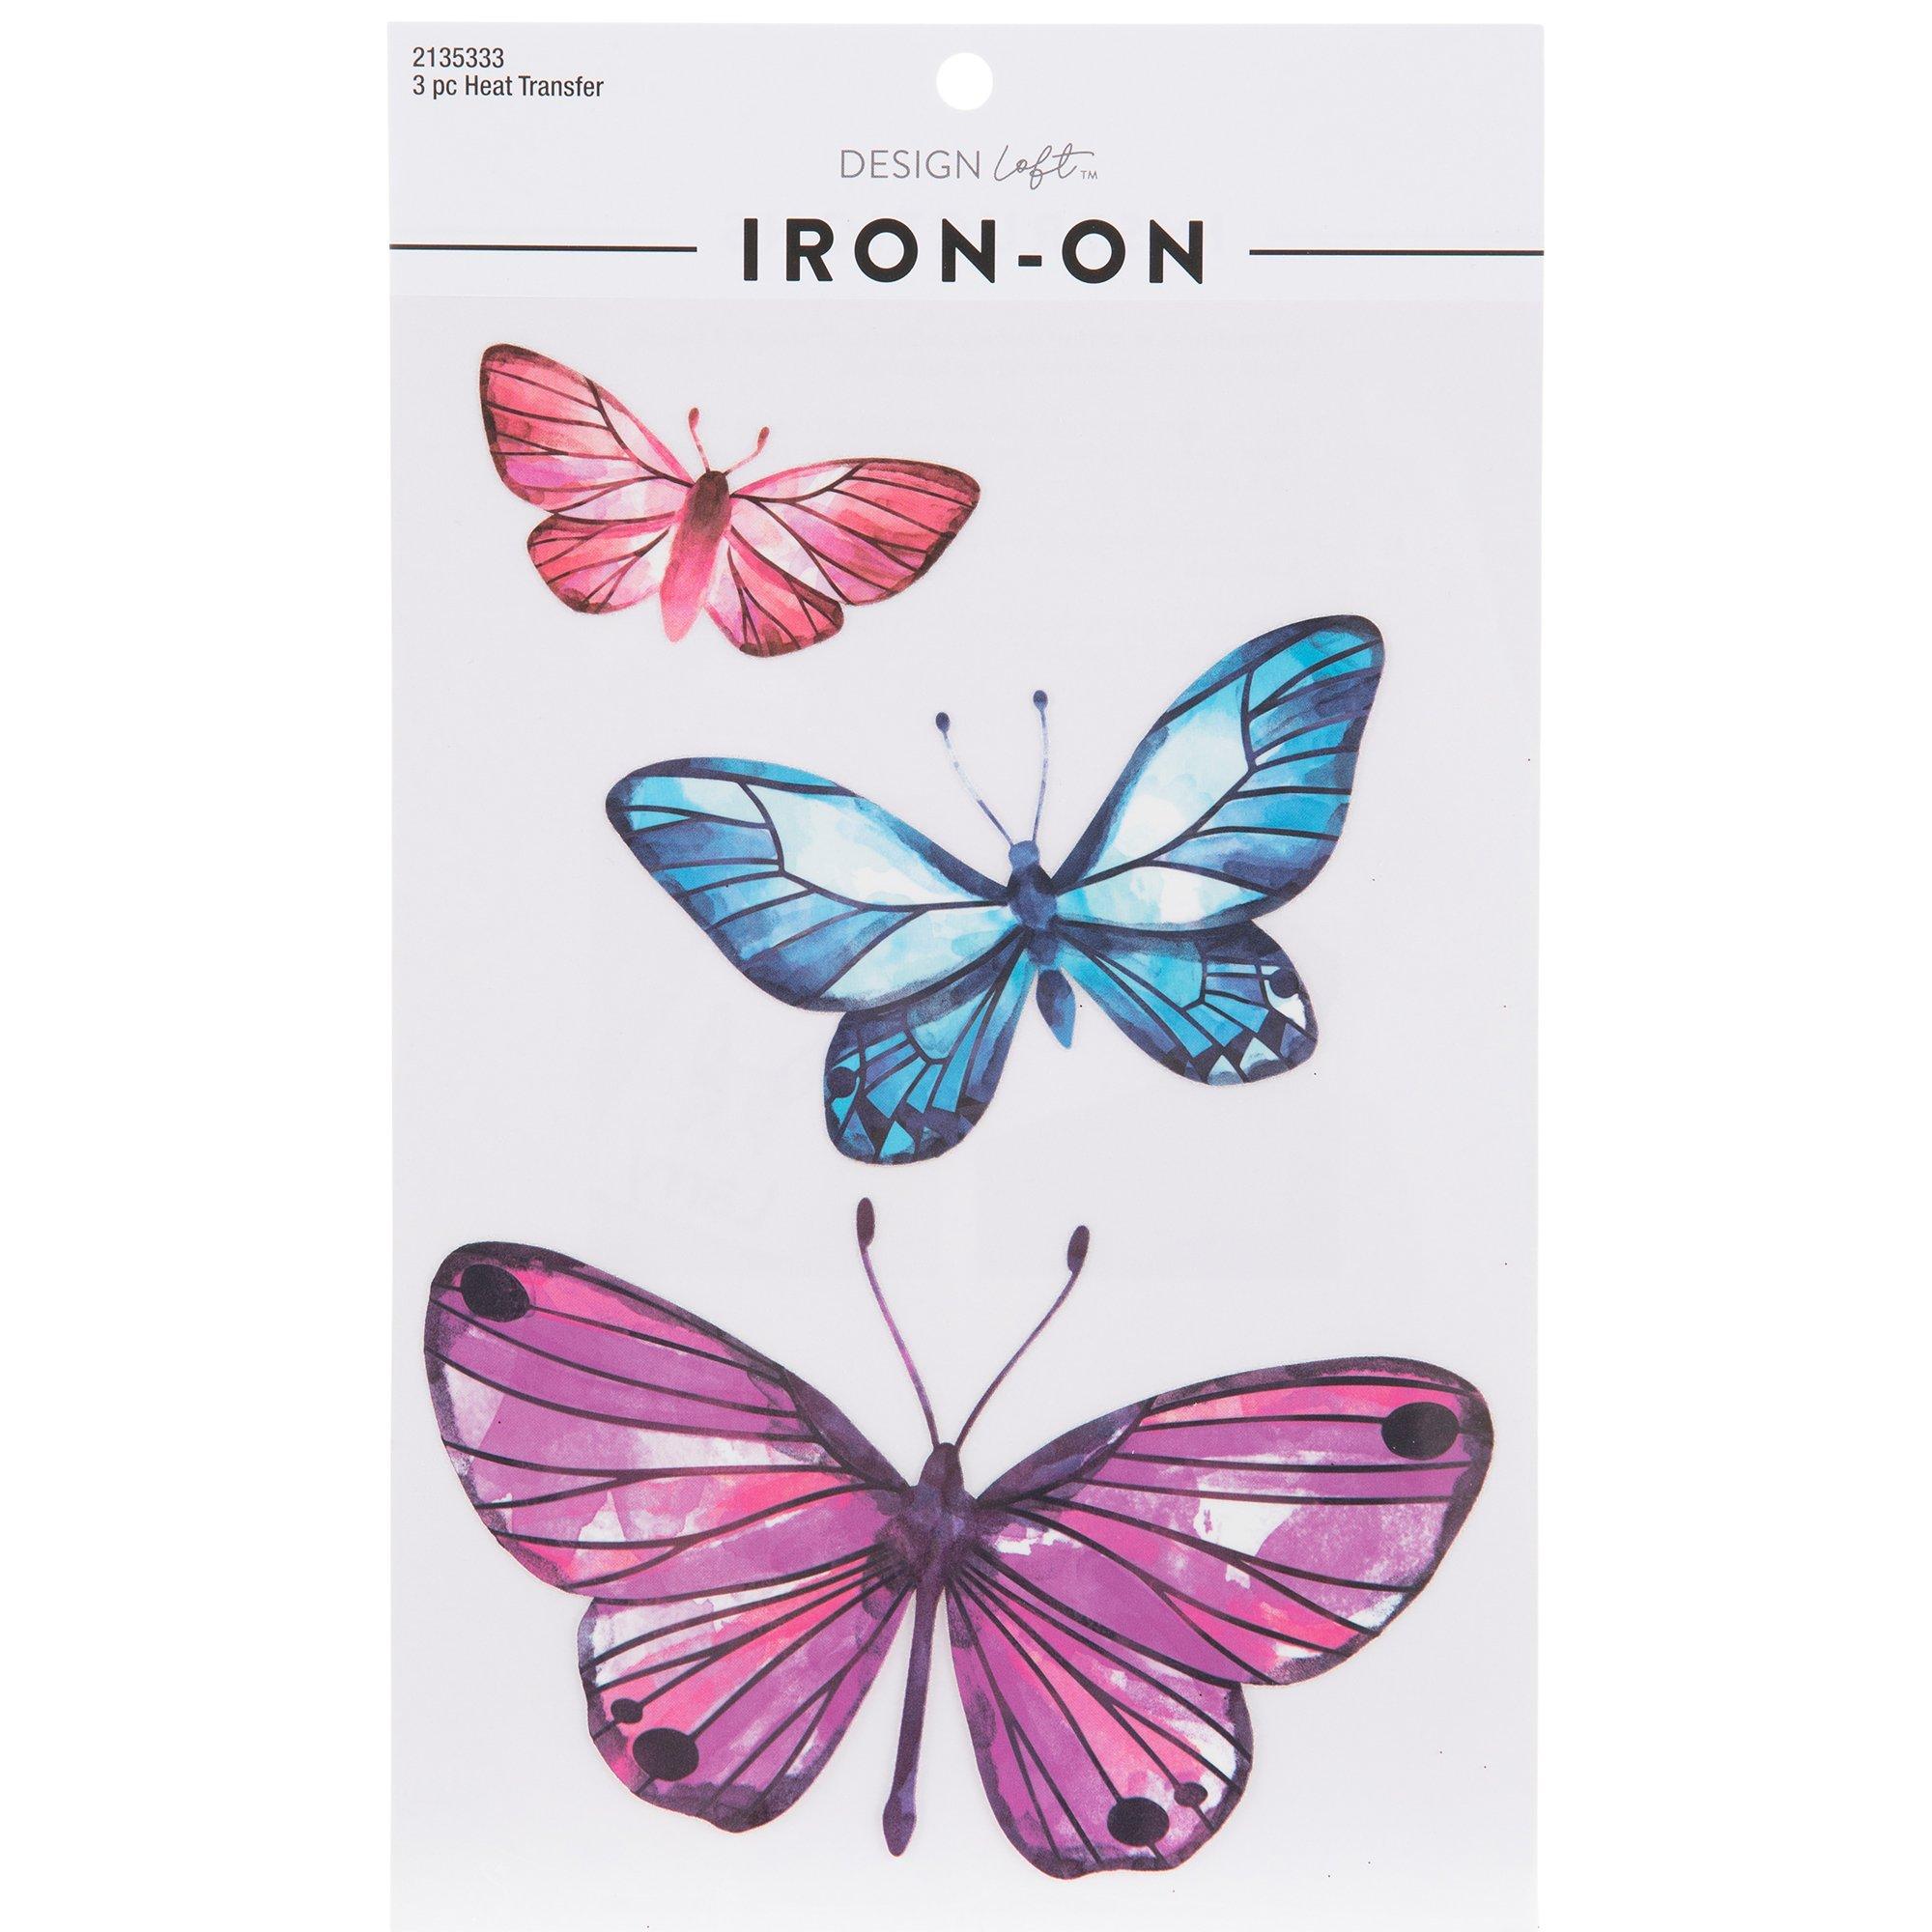 5 Pieces Butterfly Iron on Patches Heat Transfer Colorful Cute Stickers  Washable DIY Iron on Transfer Decals for T-Shirt Jeans Backpacks Families